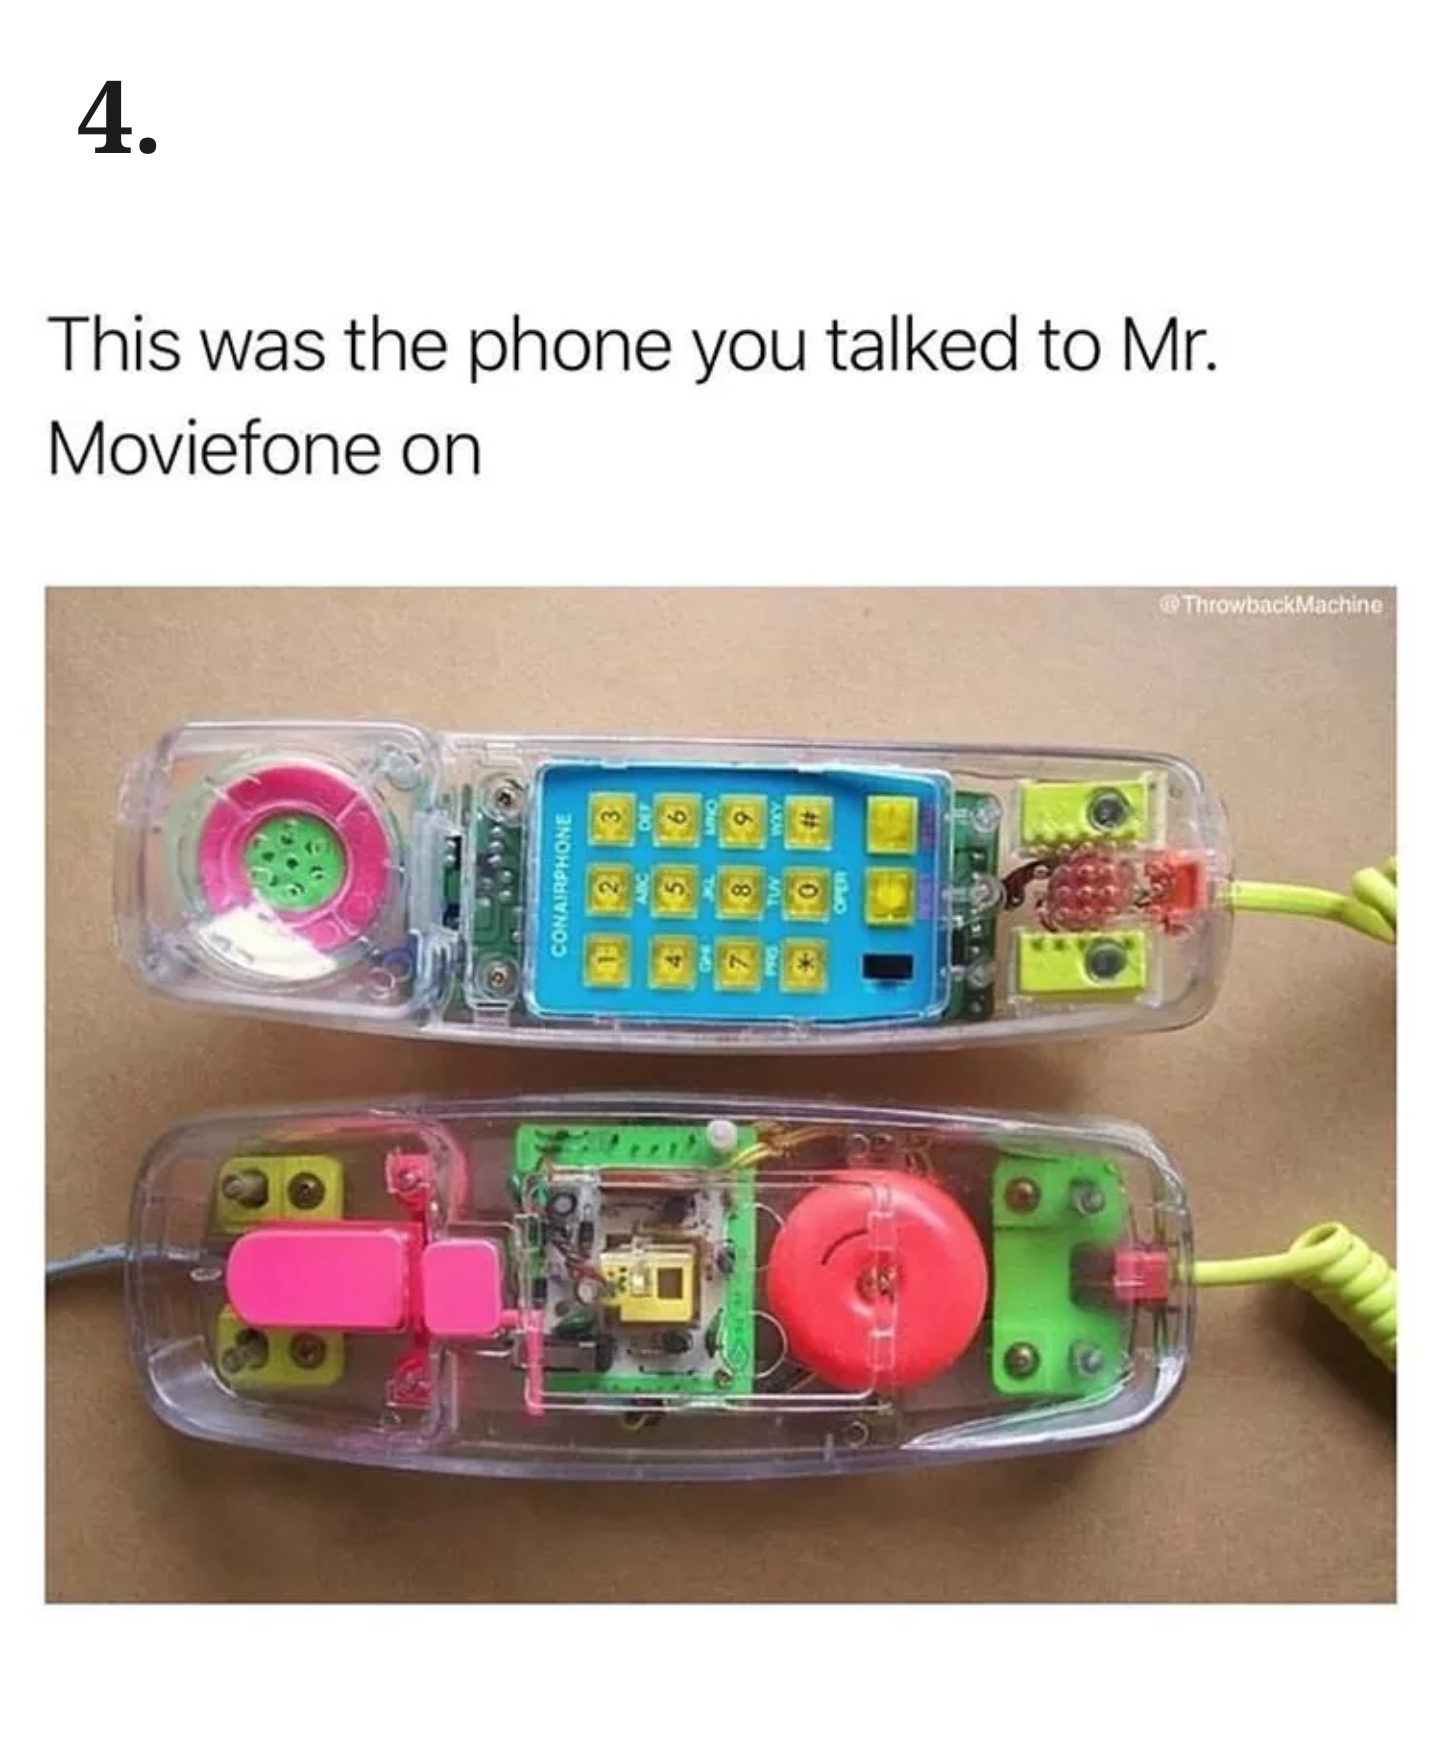 90s stuff - This was the phone you talked to Mr. Moviefone on